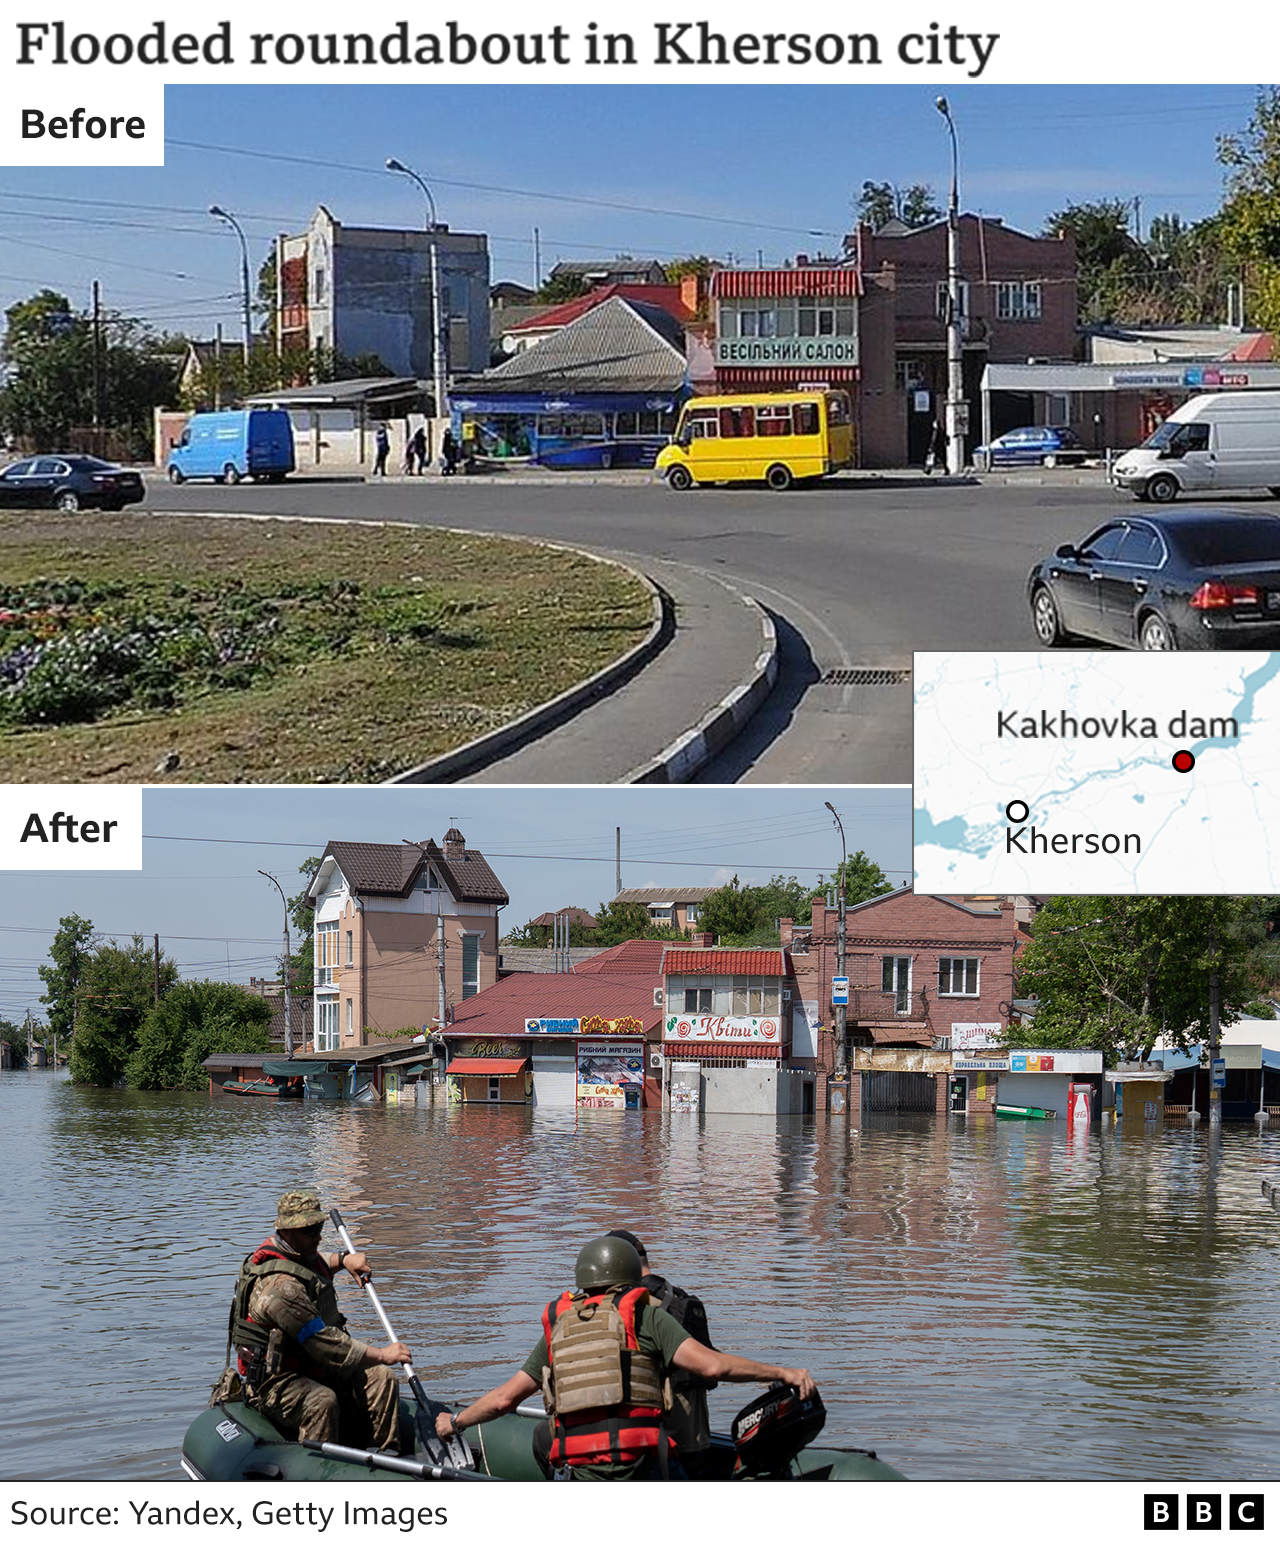 Before and after images showing flooded streets in Kherson